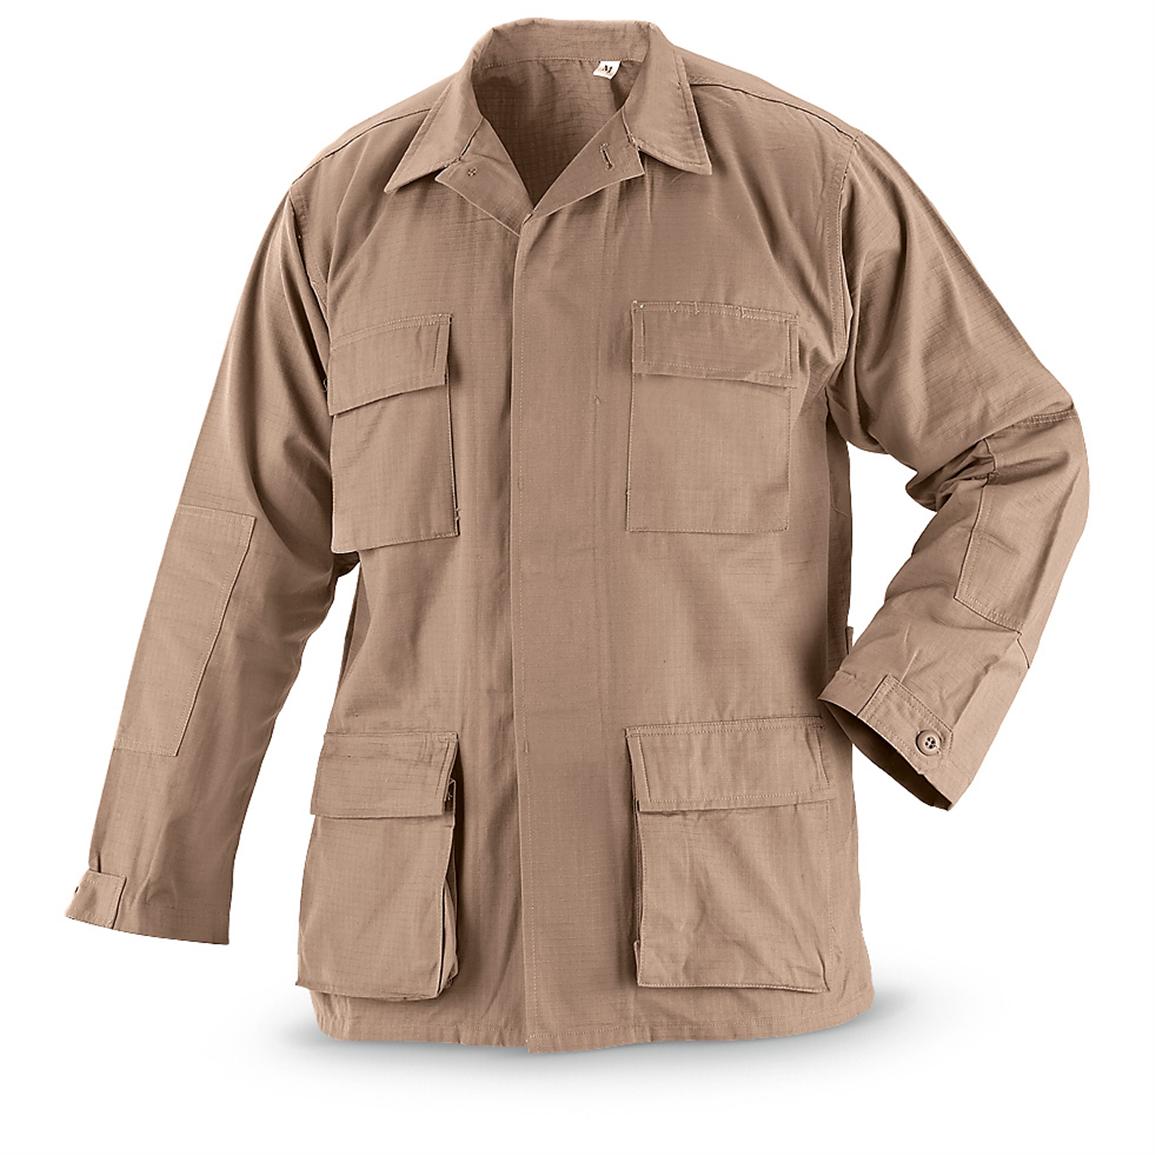 Military surplus - style Ripstop BDU Shirt, Coyote - 211012 